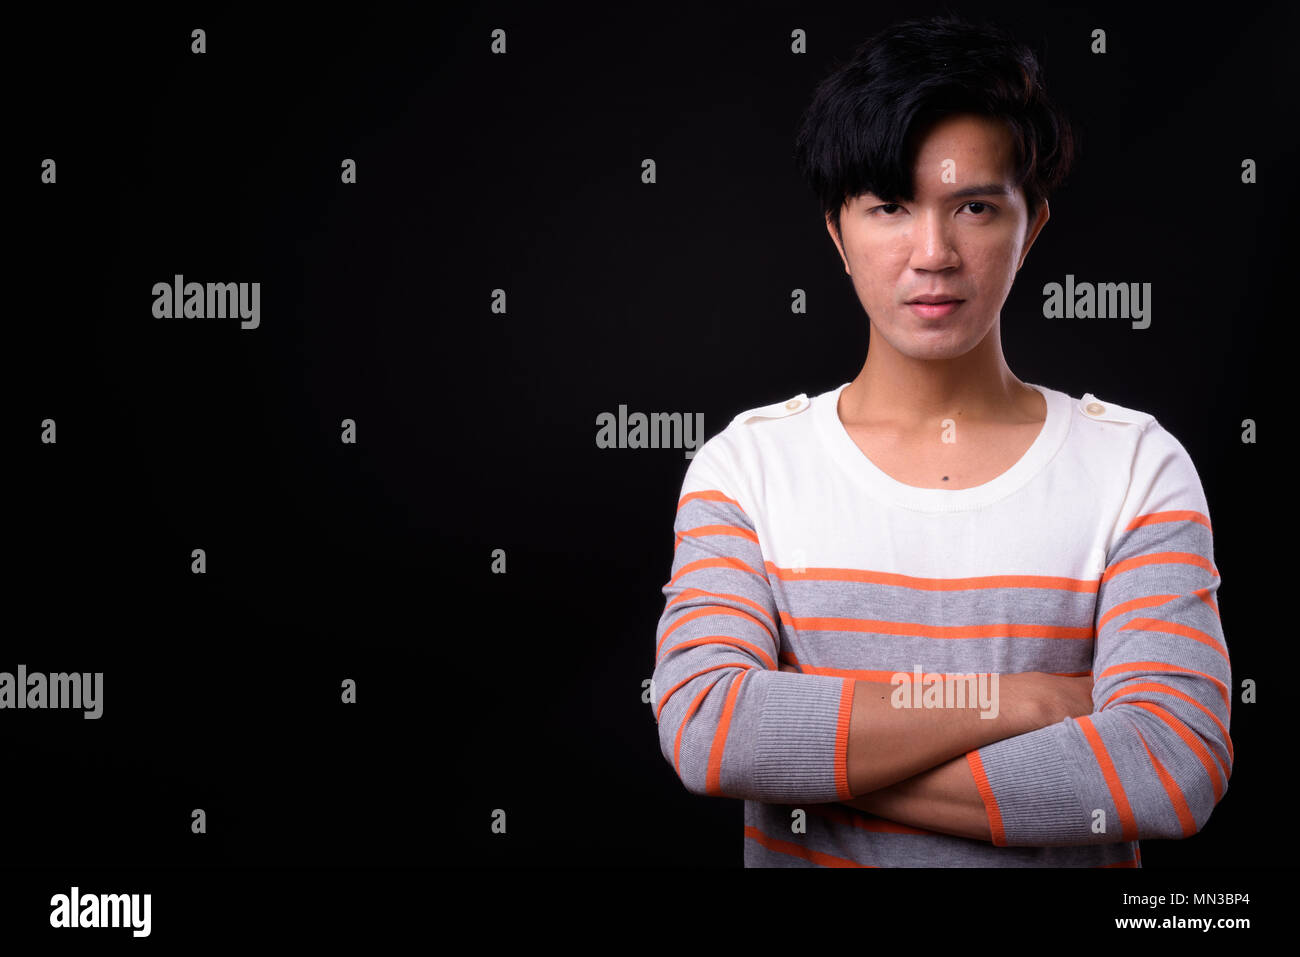 Young handsome Asian man against black background Stock Photo